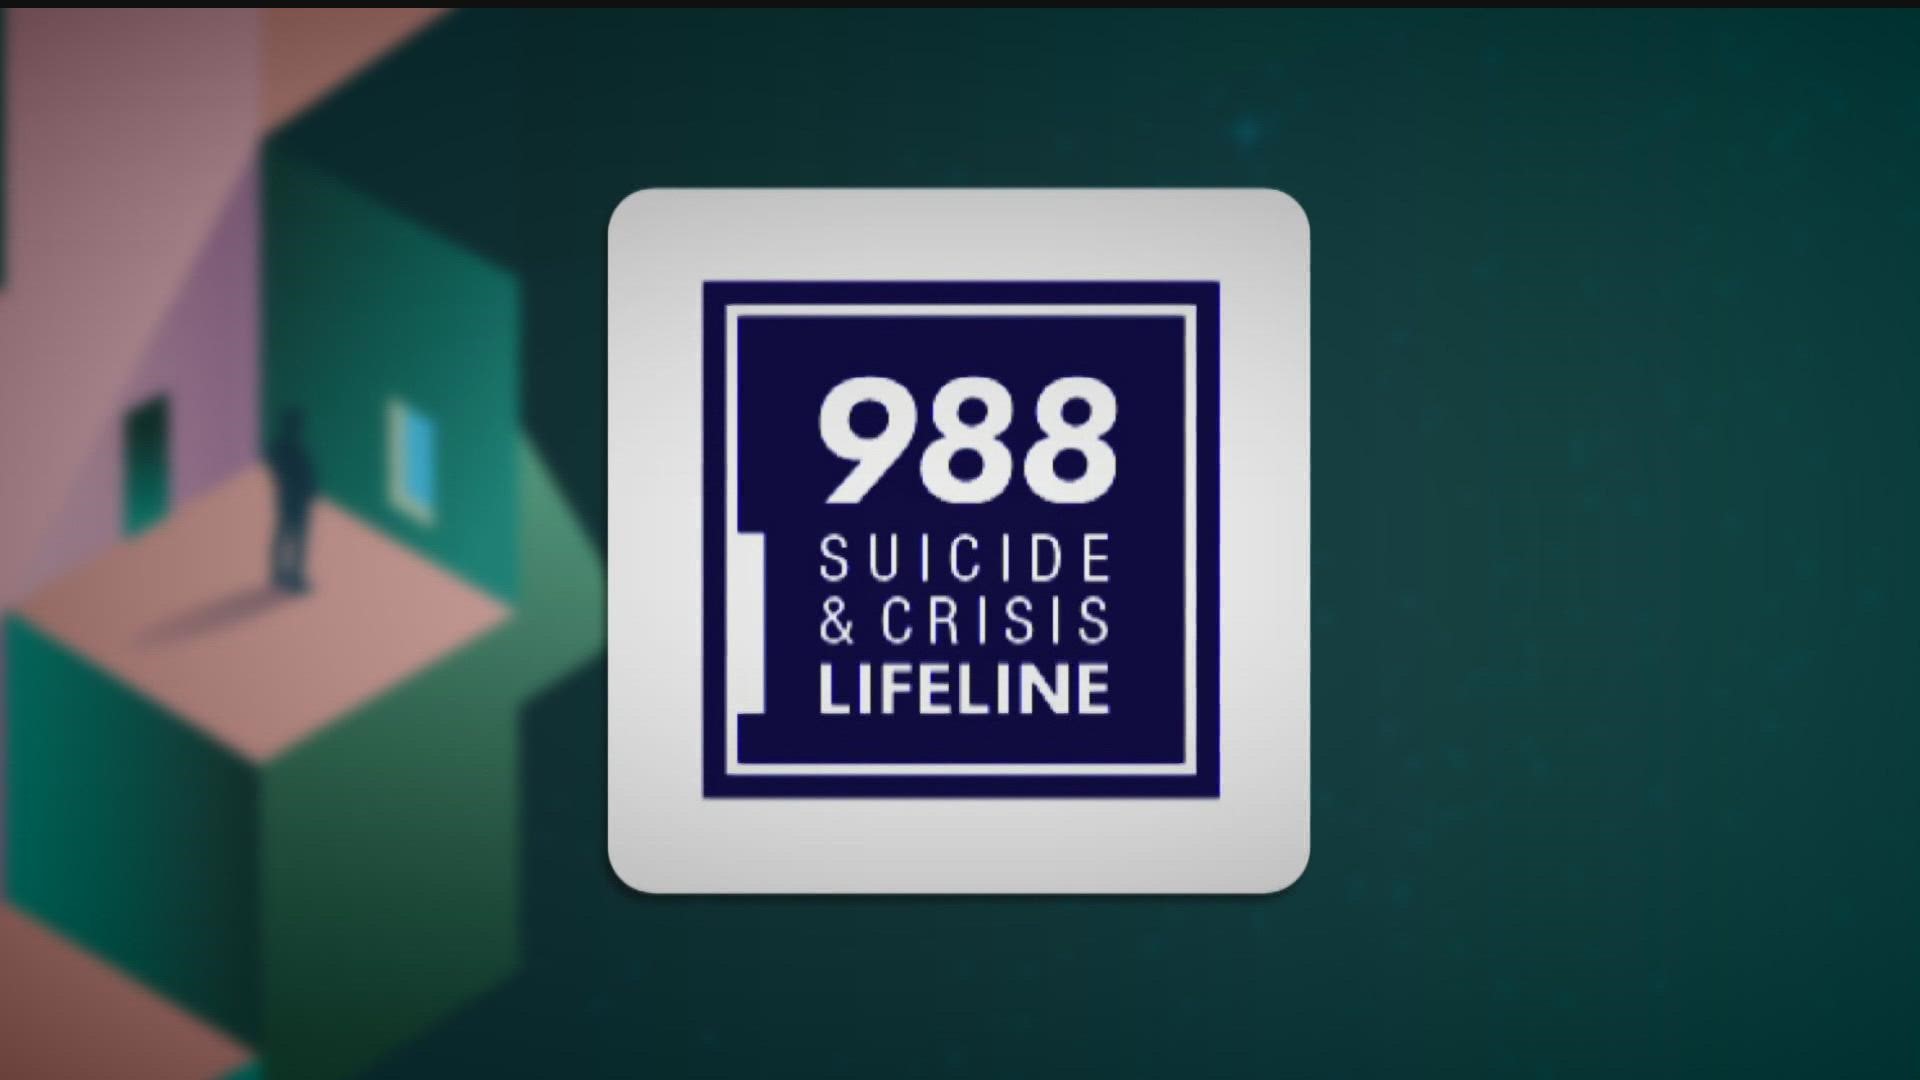 The new 3-digit code streamlining access to mental health support has been active since July 16.